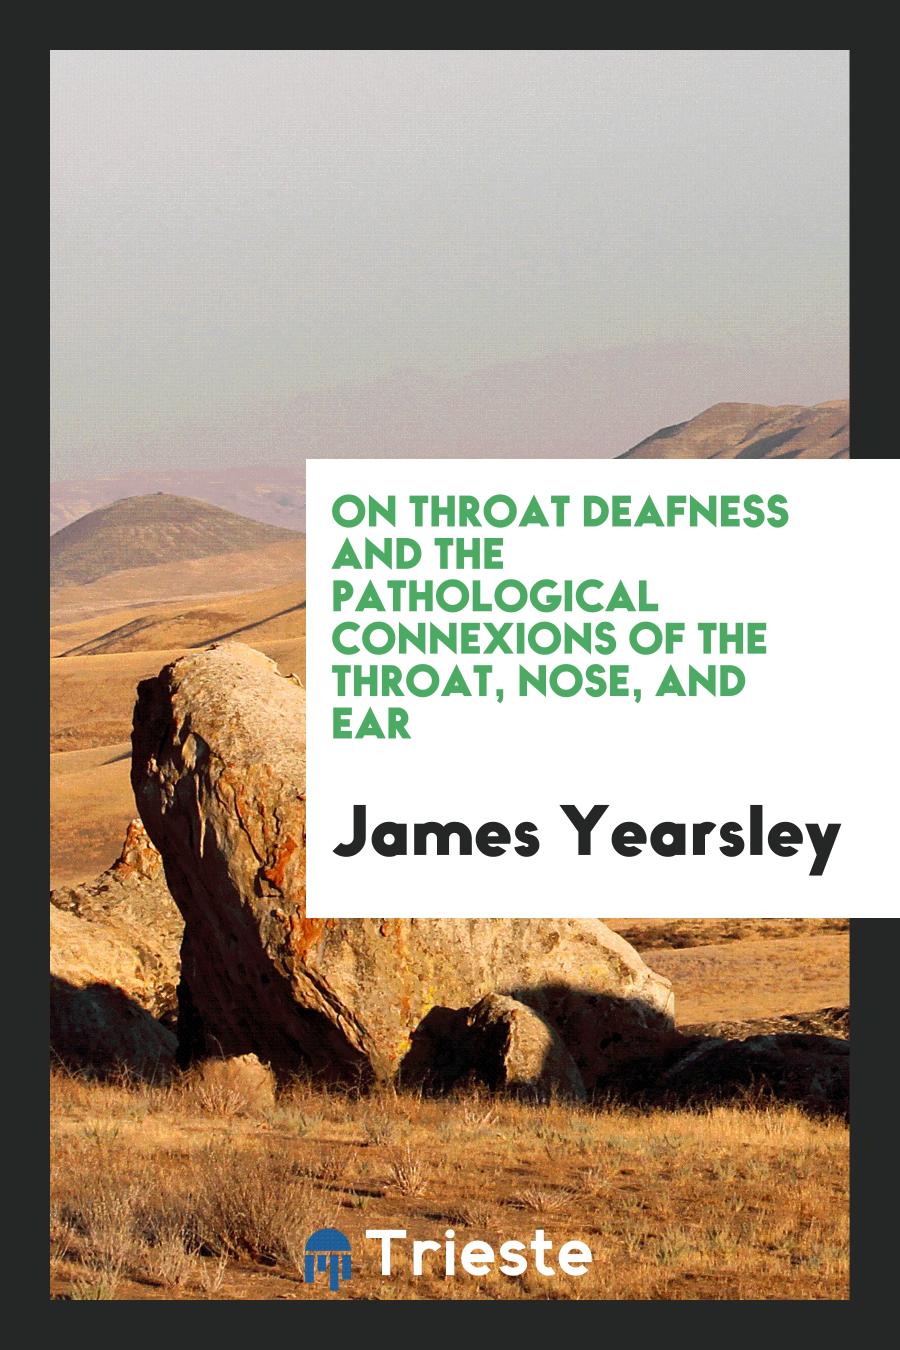 On throat deafness and the pathological connexions of the throat, nose, and ear